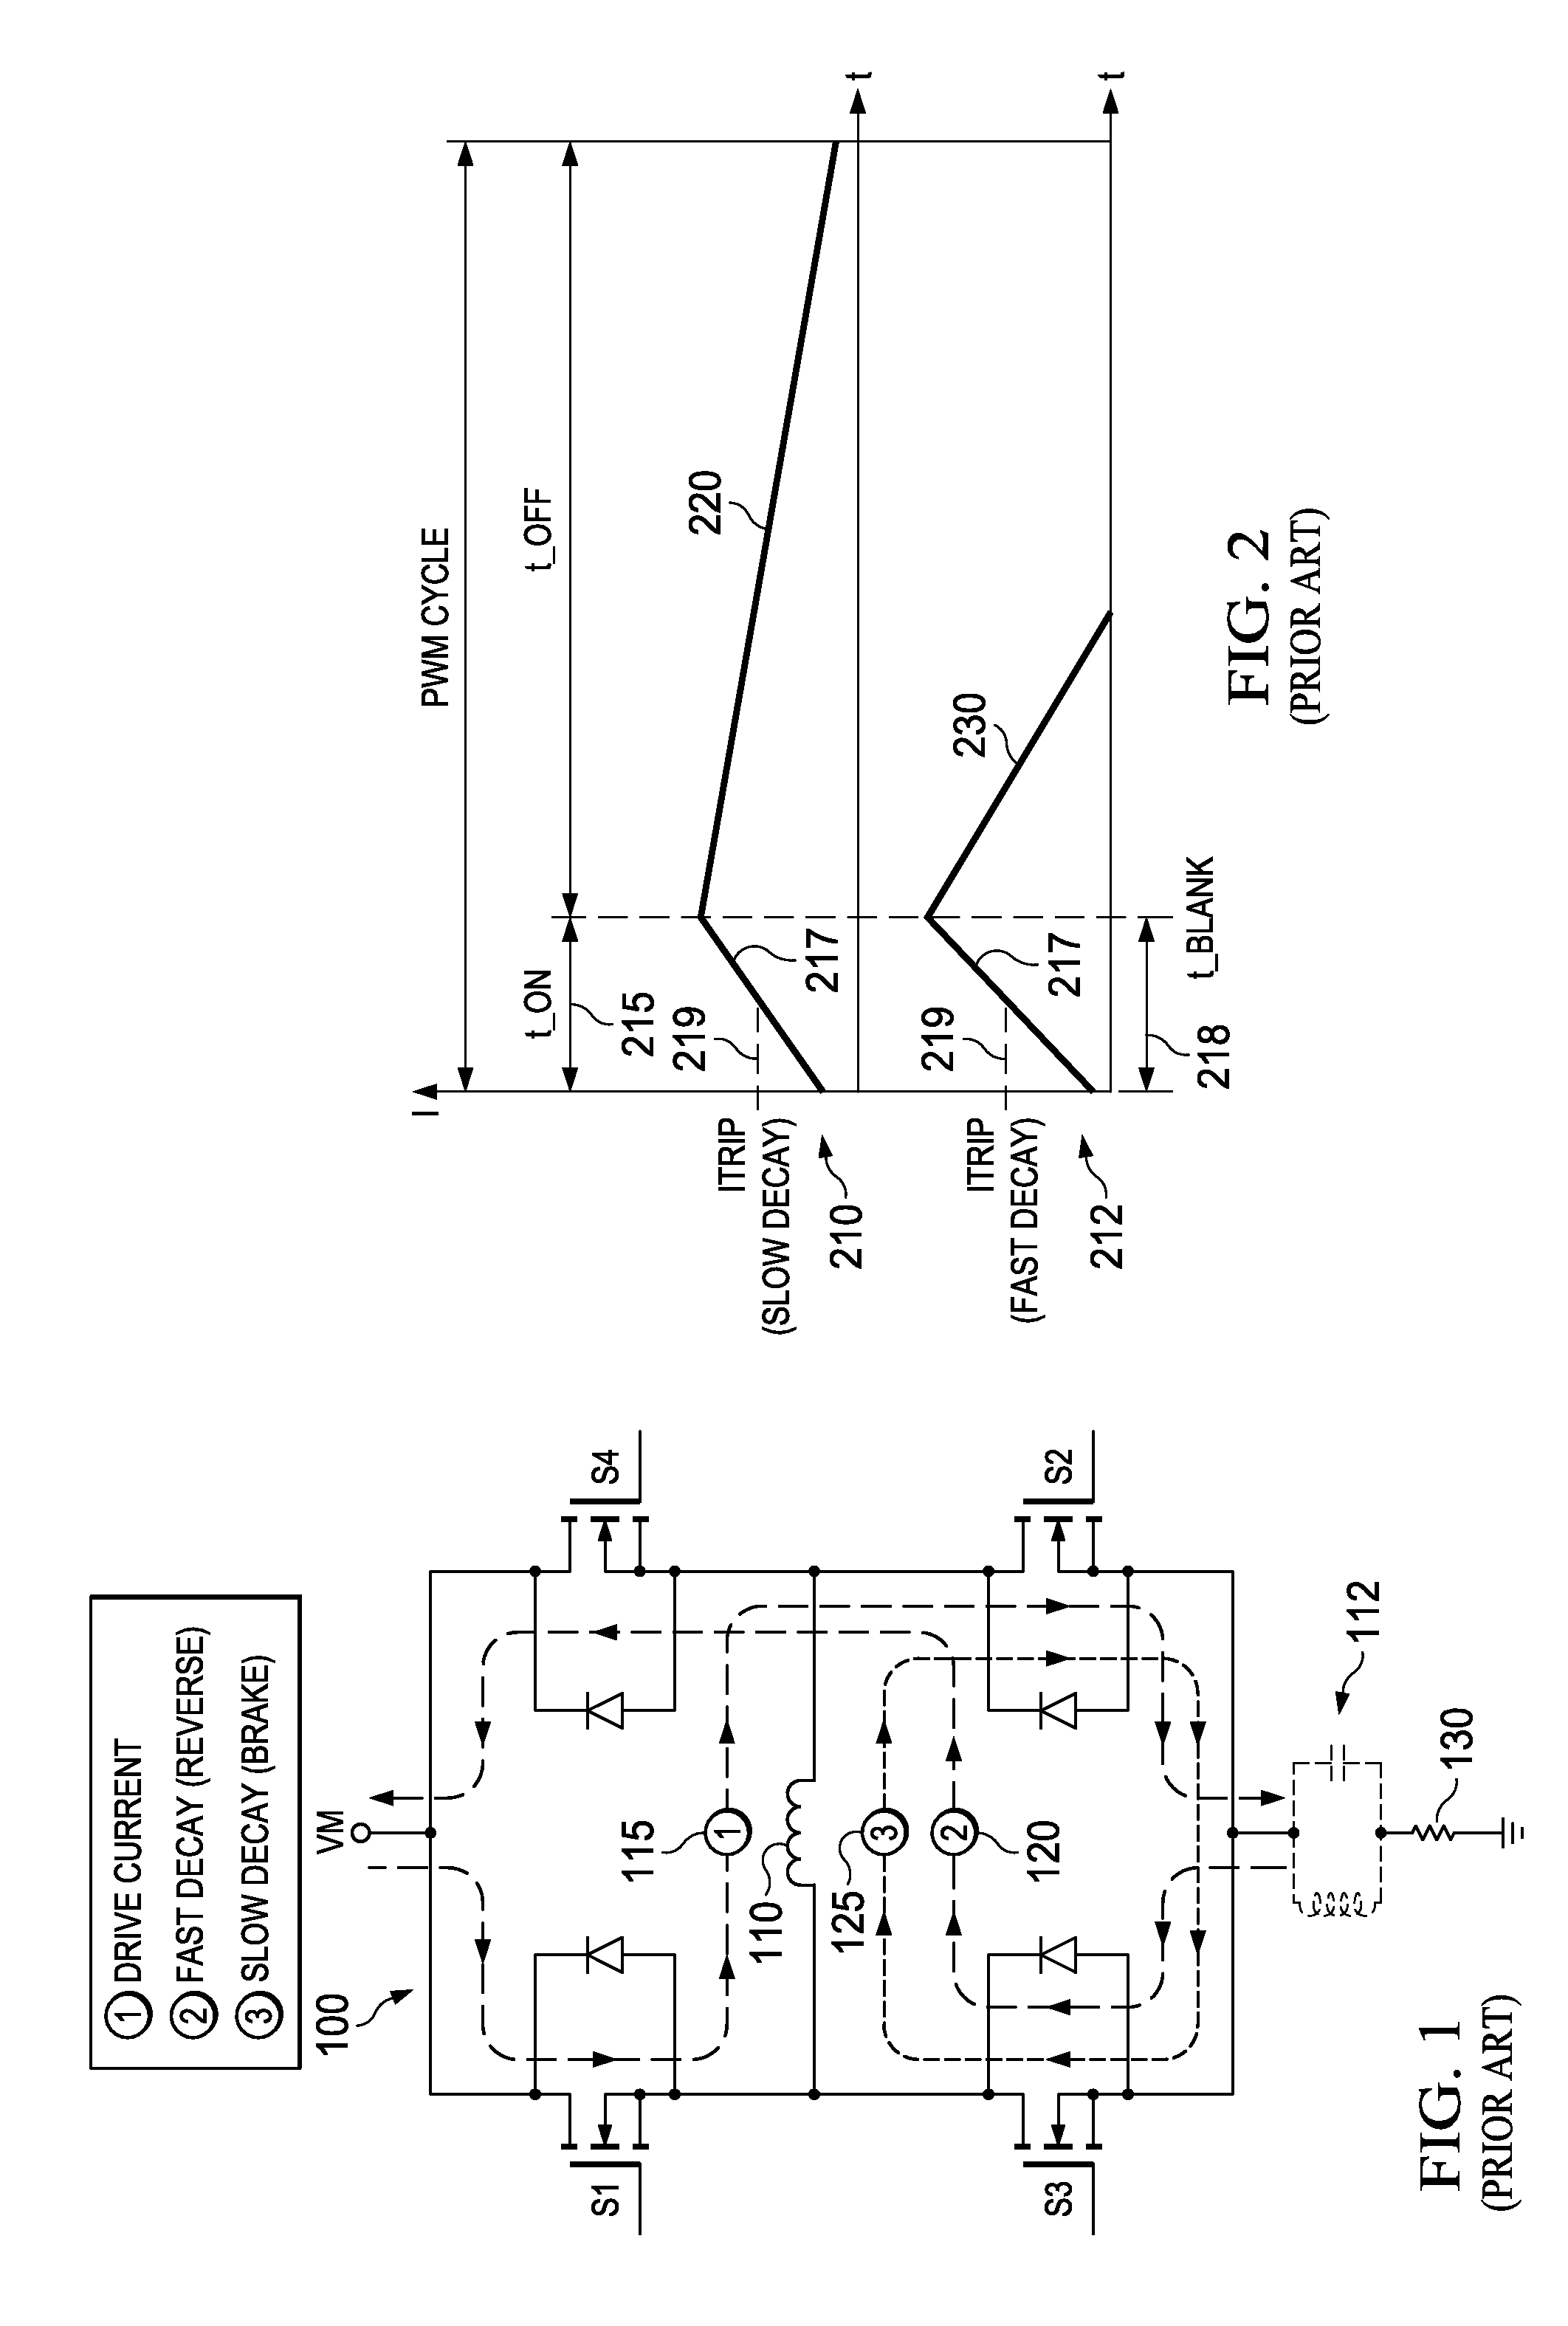 Current regulation blanking time apparatus and methods